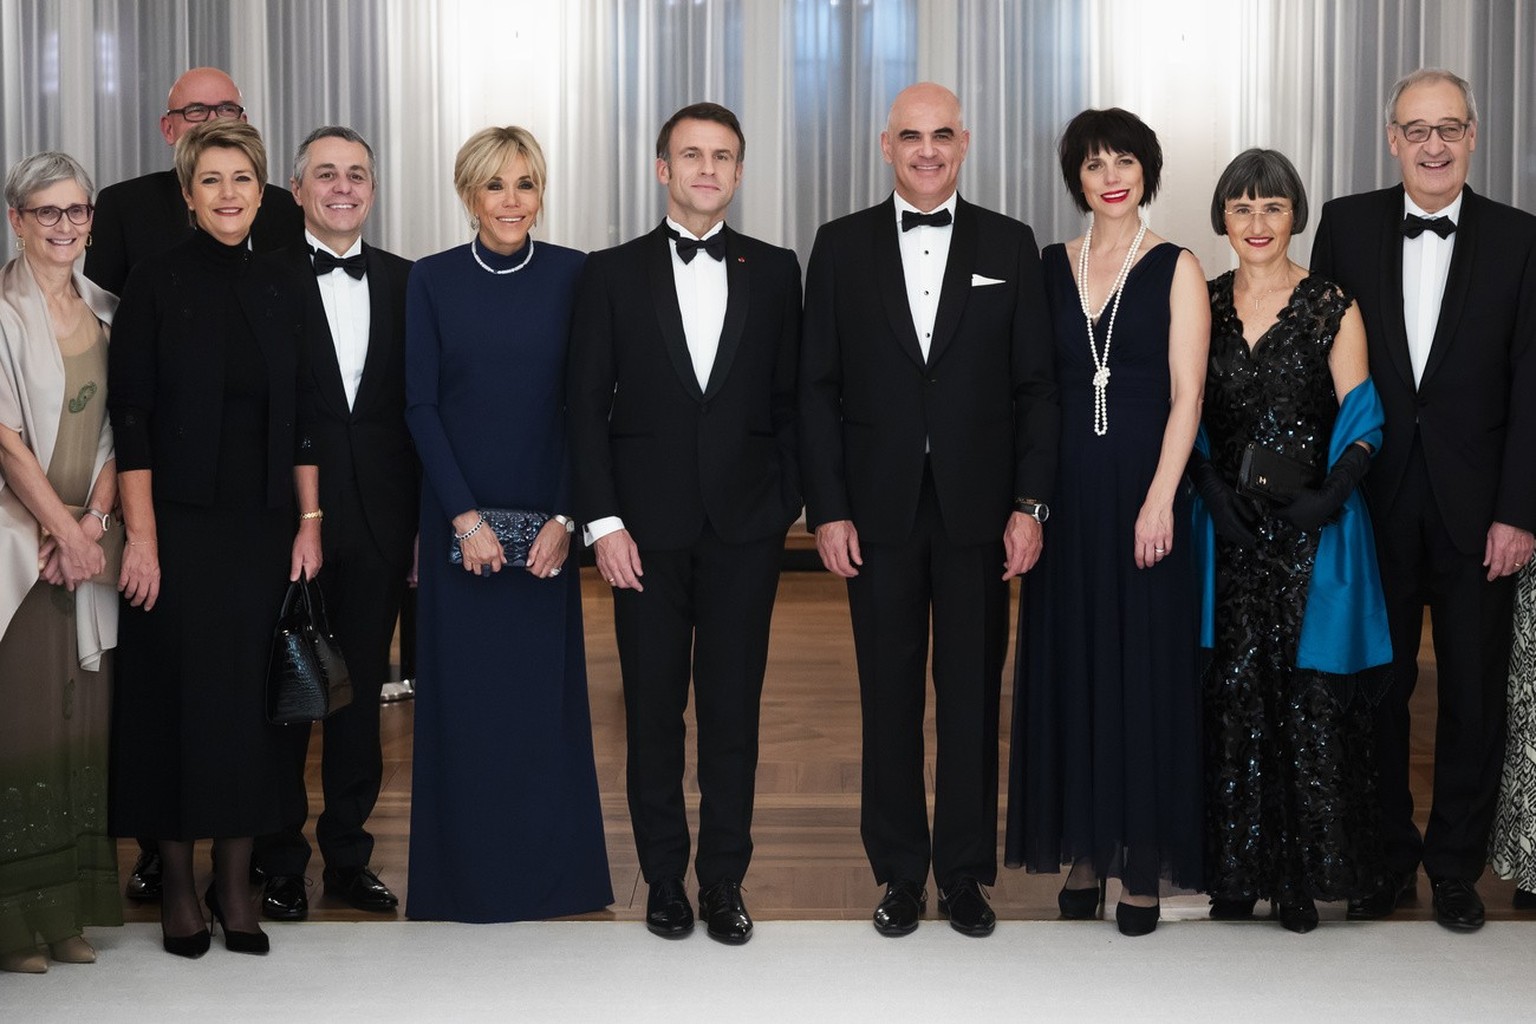 Paola Rodoni, wife of Ignazio Cassis, Swiss Federal Councillor Karin Keller-Sutter, Swiss Federal Councillor Ignazio Cassis, Brigitte Macron, French President Emanuel Macron, Swiss Federal President A ...